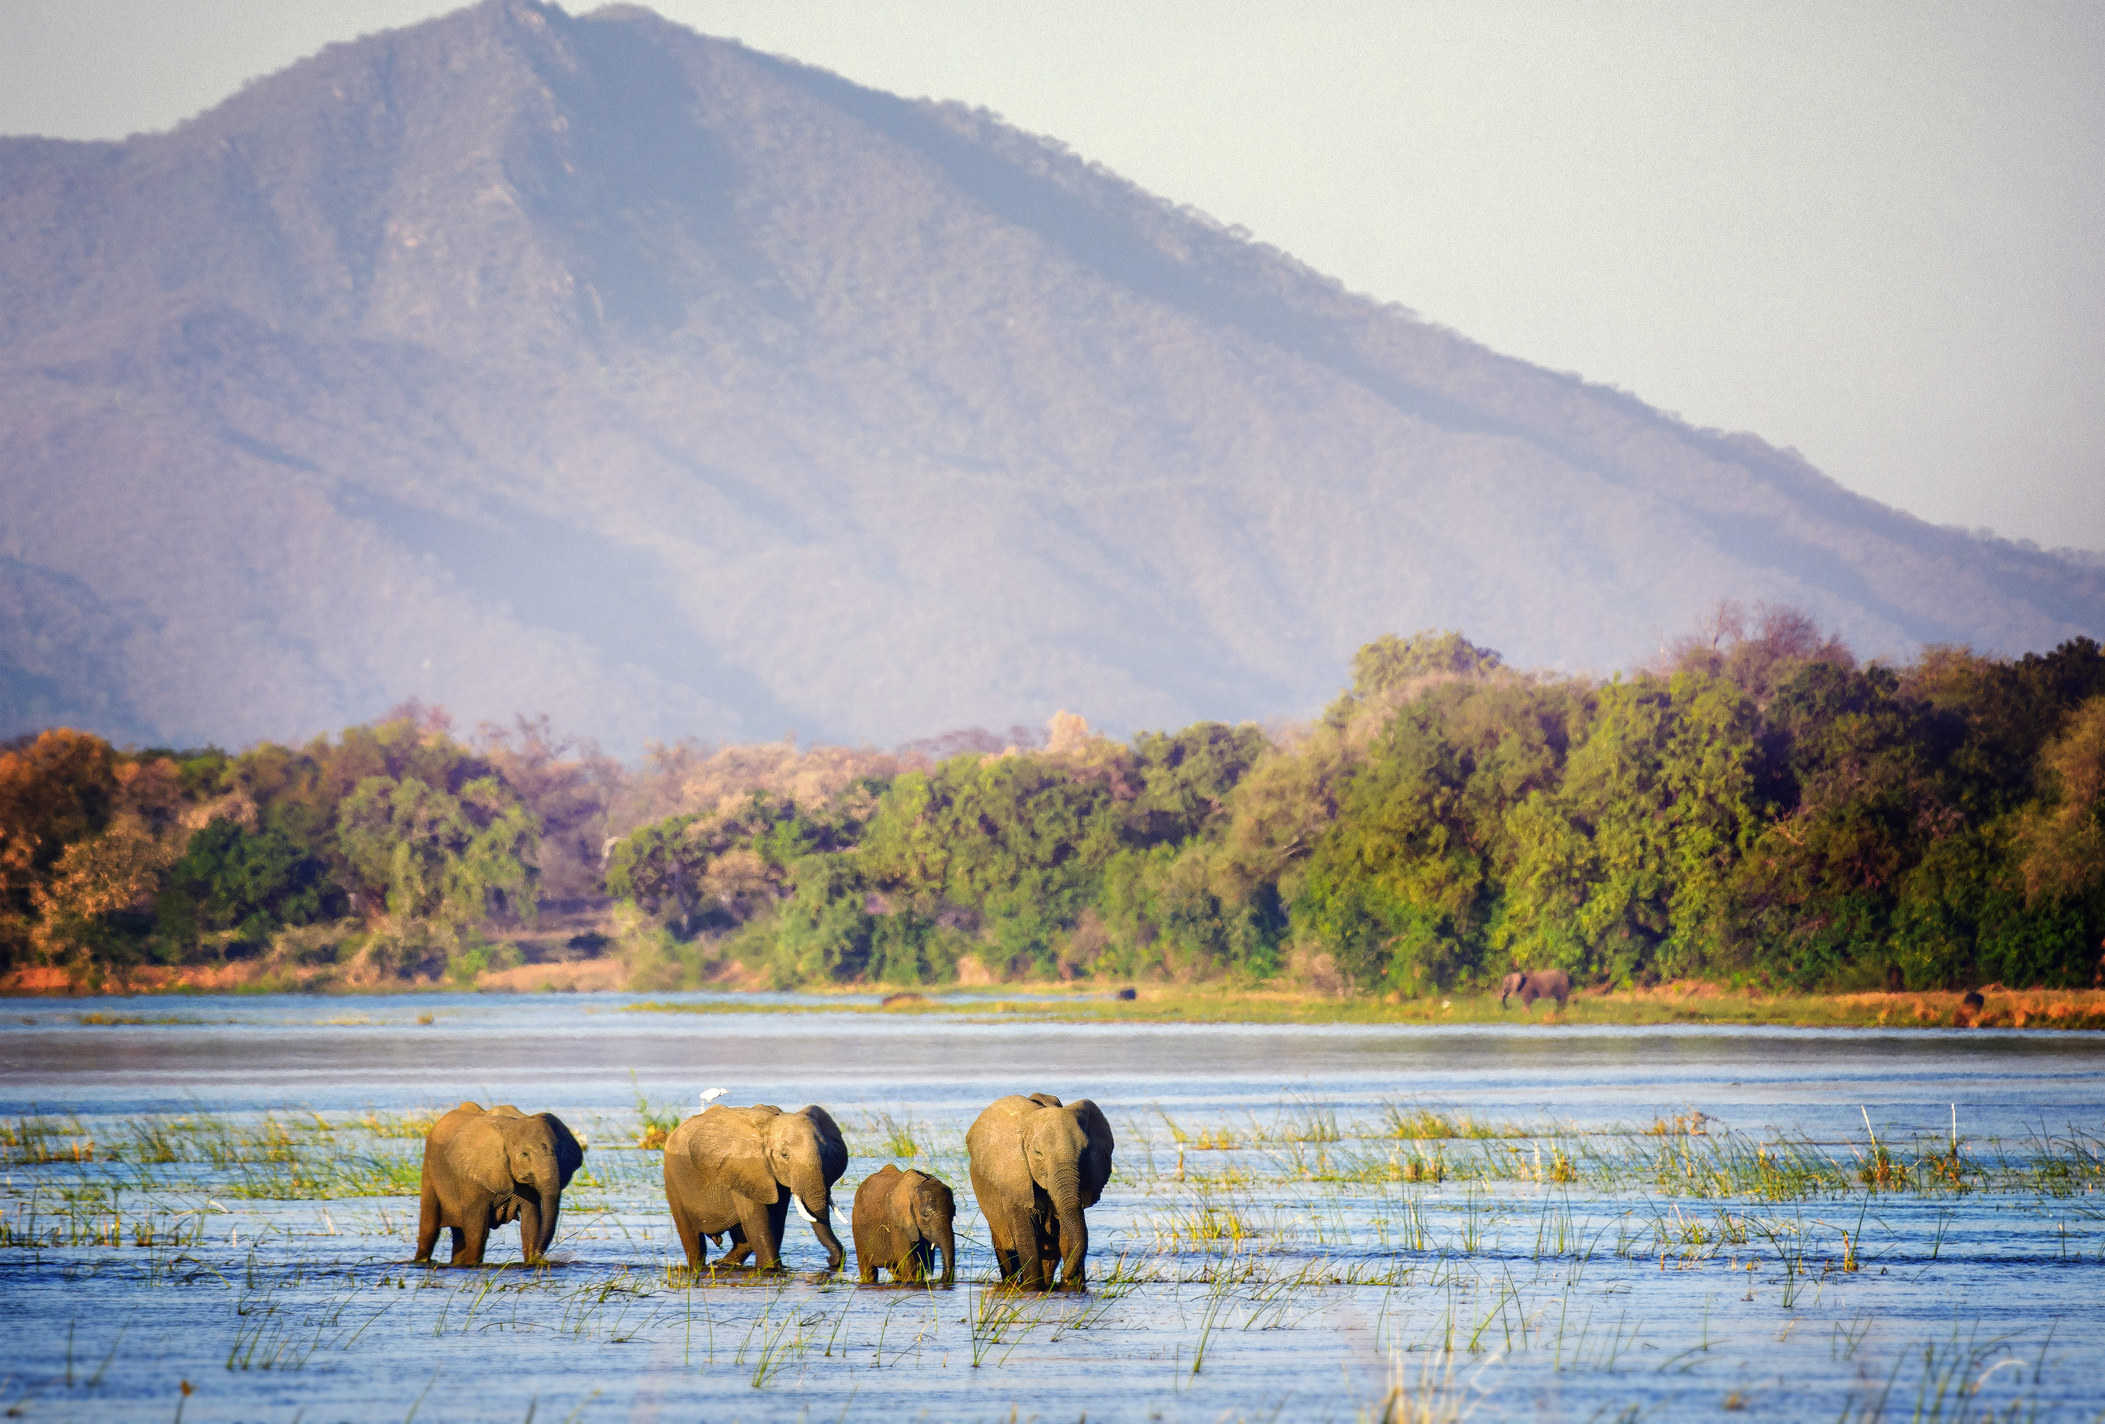 A small Elephant family wading through the water.